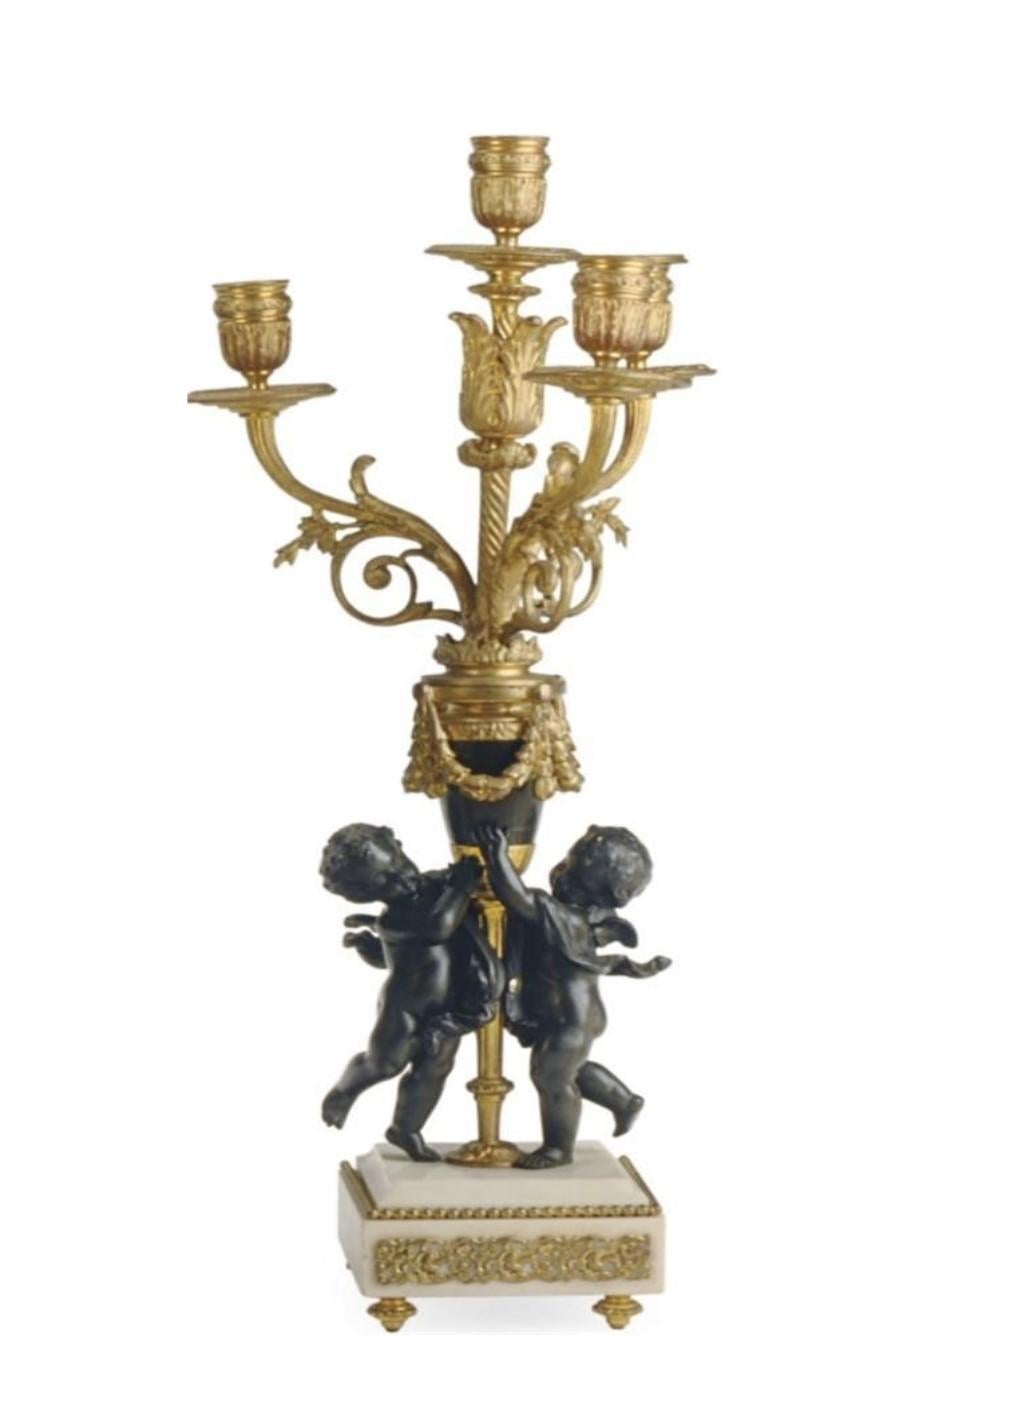 The Following Item we are Offering is A Magnificent Louis XVI Style Gilt Metal and Bronze Mantle Cherub 3 Pc Clock Set, circular white enamel dial with Floral Wreaths and Numbers enclosing reticulated hour/minute hands above twin key escapements